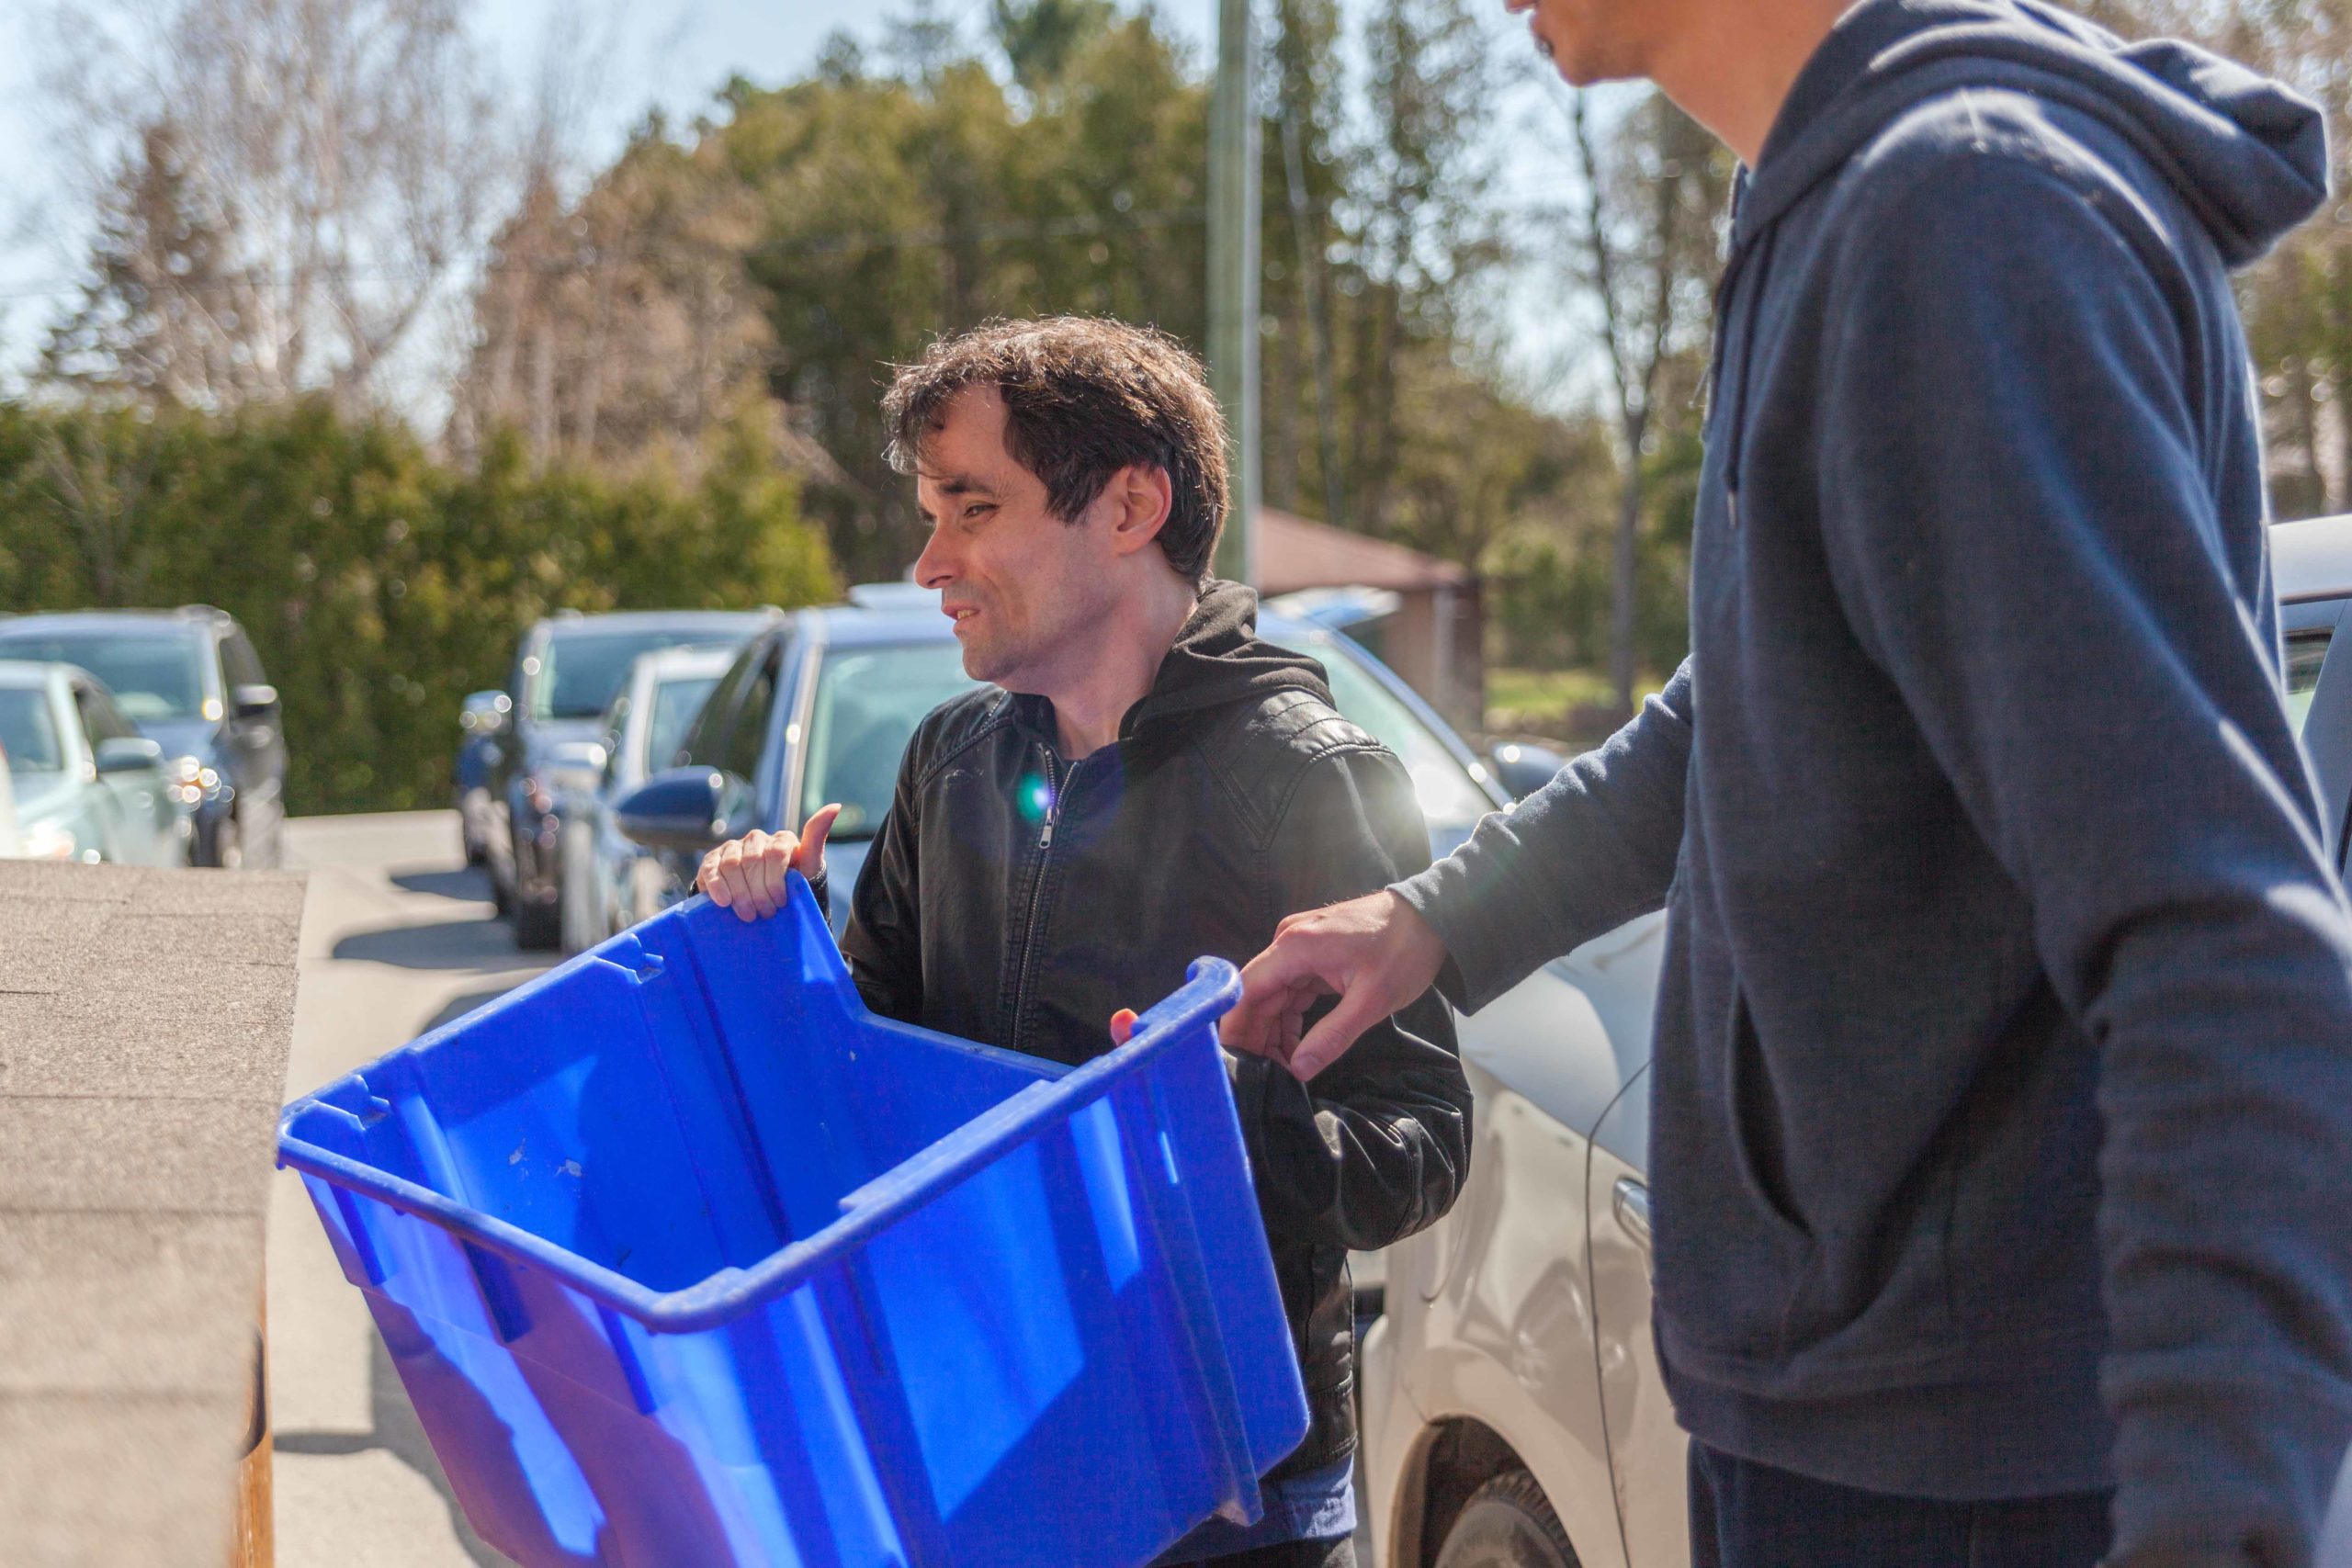 Intervenor assists man with deafblindness in taking out the recycling. They each hold an end of the blue recycle bin.